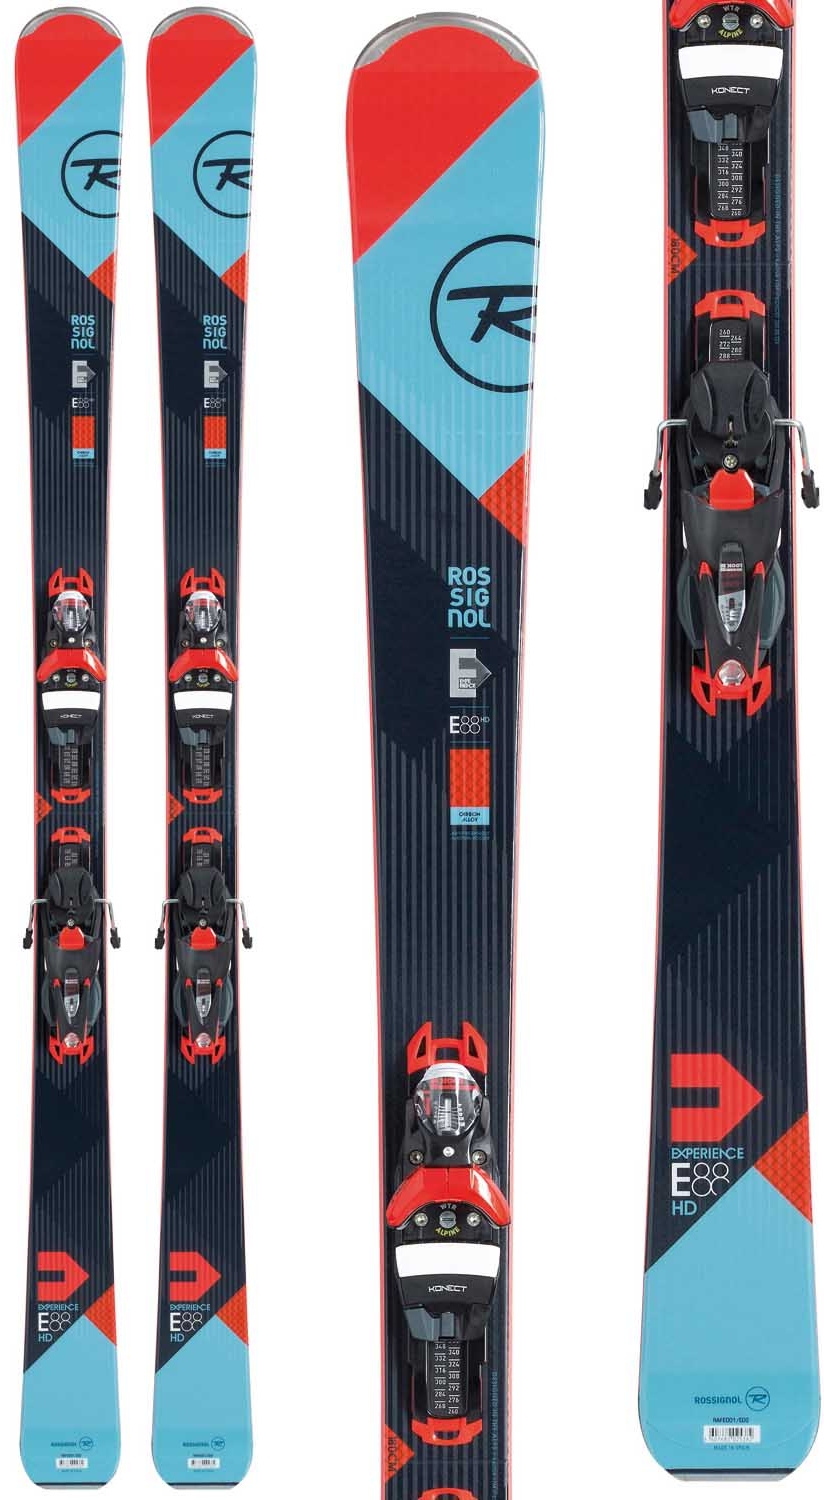 Rossignol Experience 88 HD (Konect), $899.95